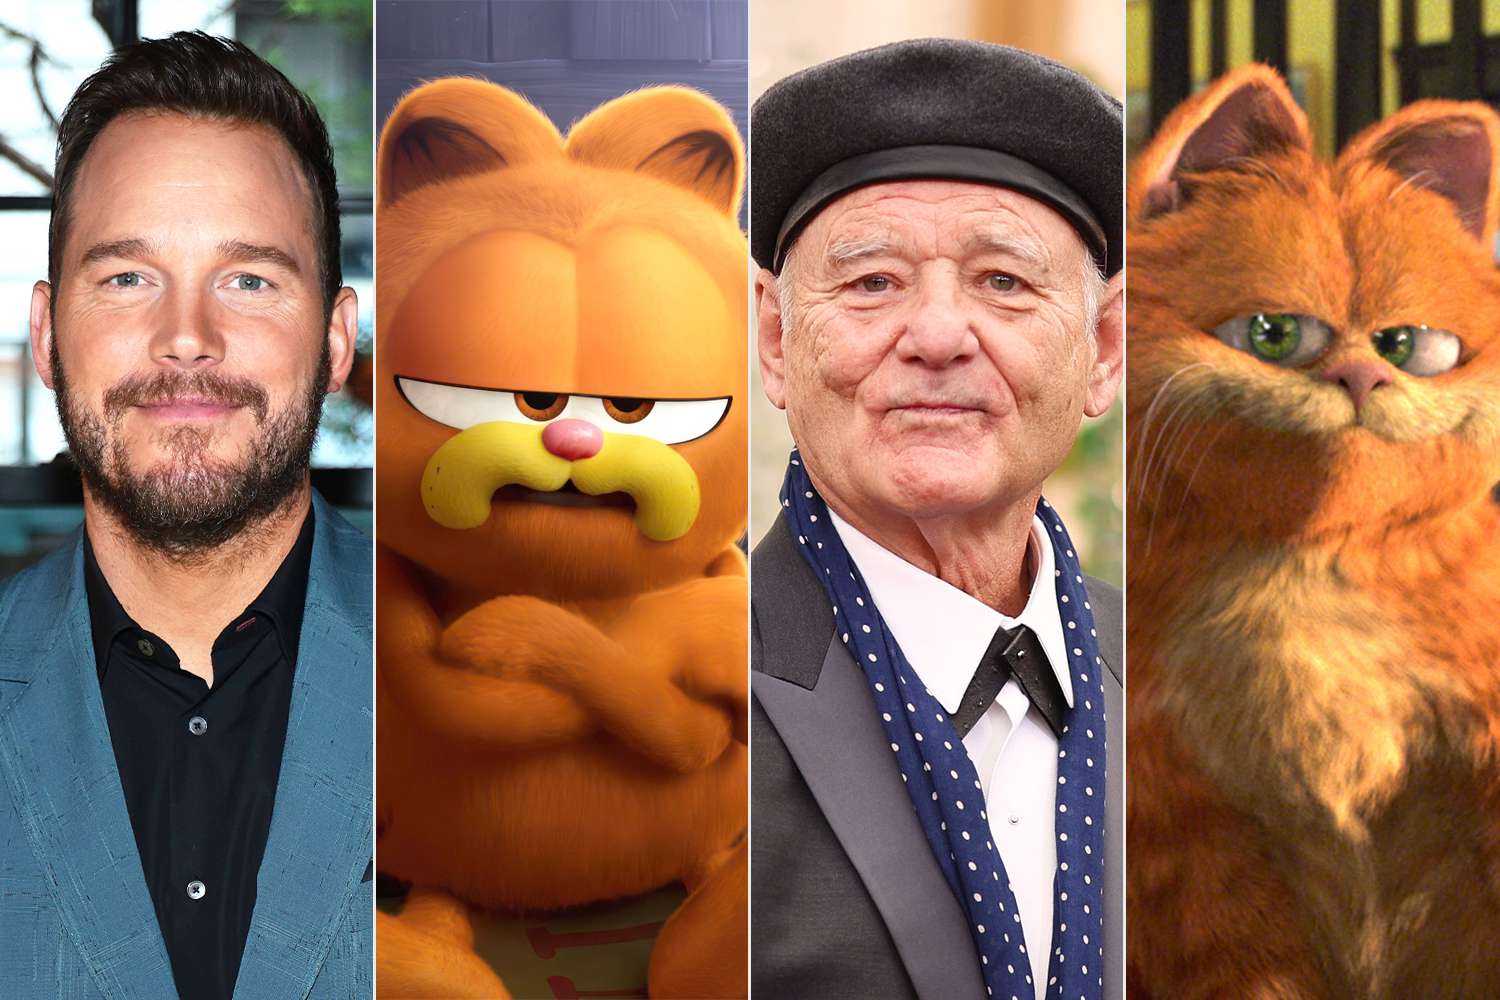 Chris Pratt Says He Tried to 'Just Be Myself' as the Voice of Garfield and Not Emulate Bill Murray